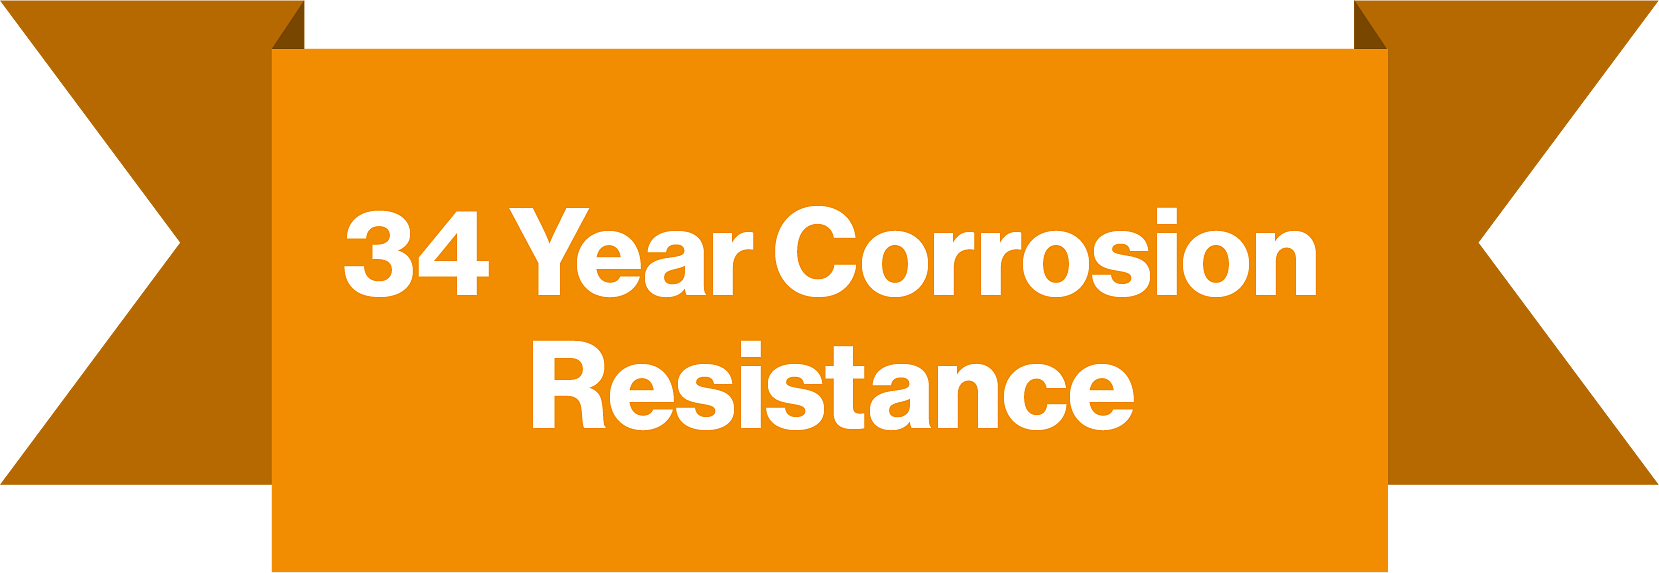 34 year corrosion resistance